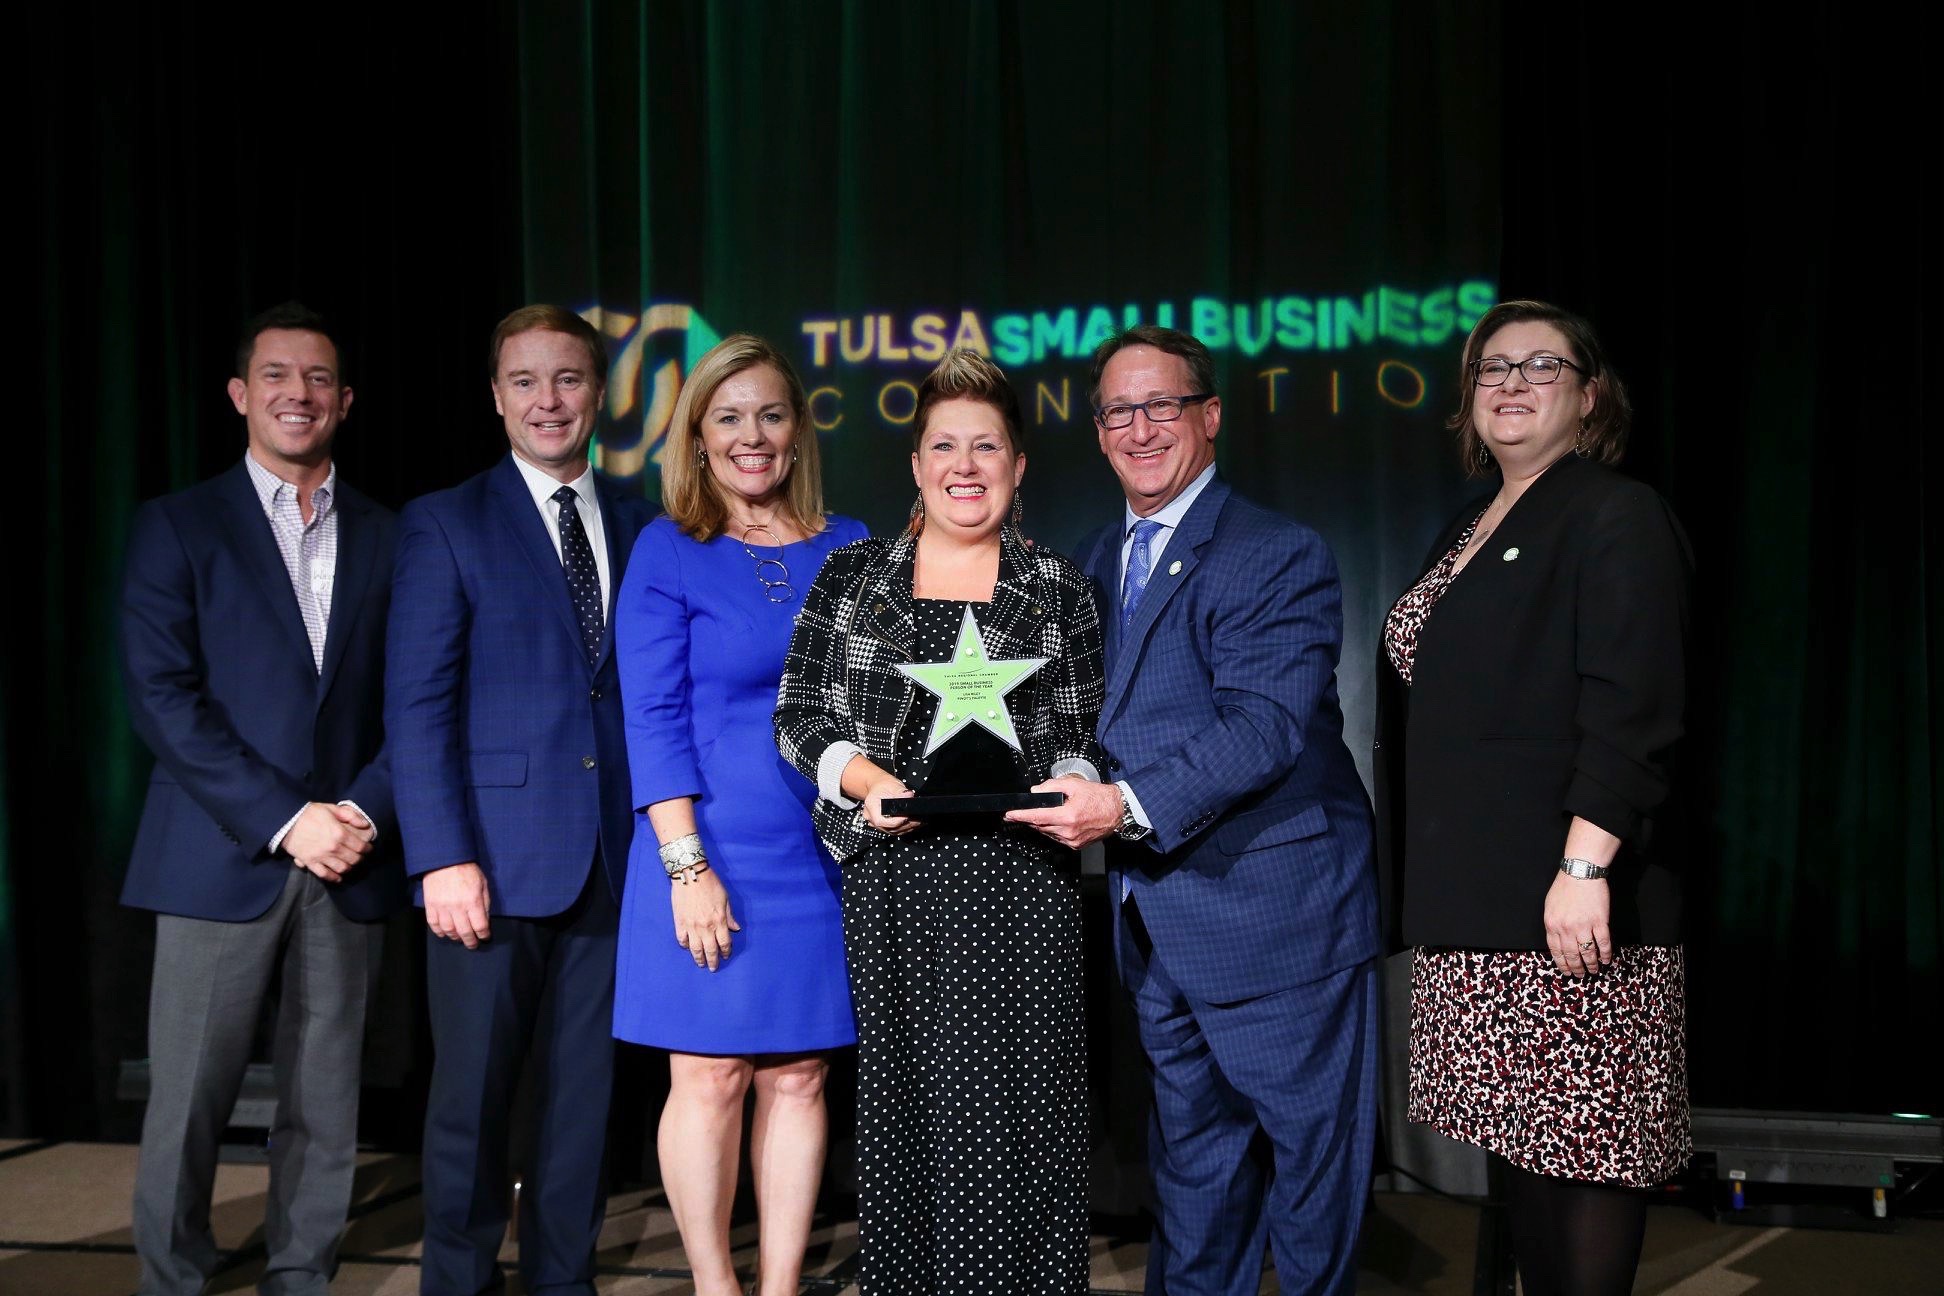 Tulsa's Premier Paint and Sip Owner Wins Tulsa's Business Person of the Year!